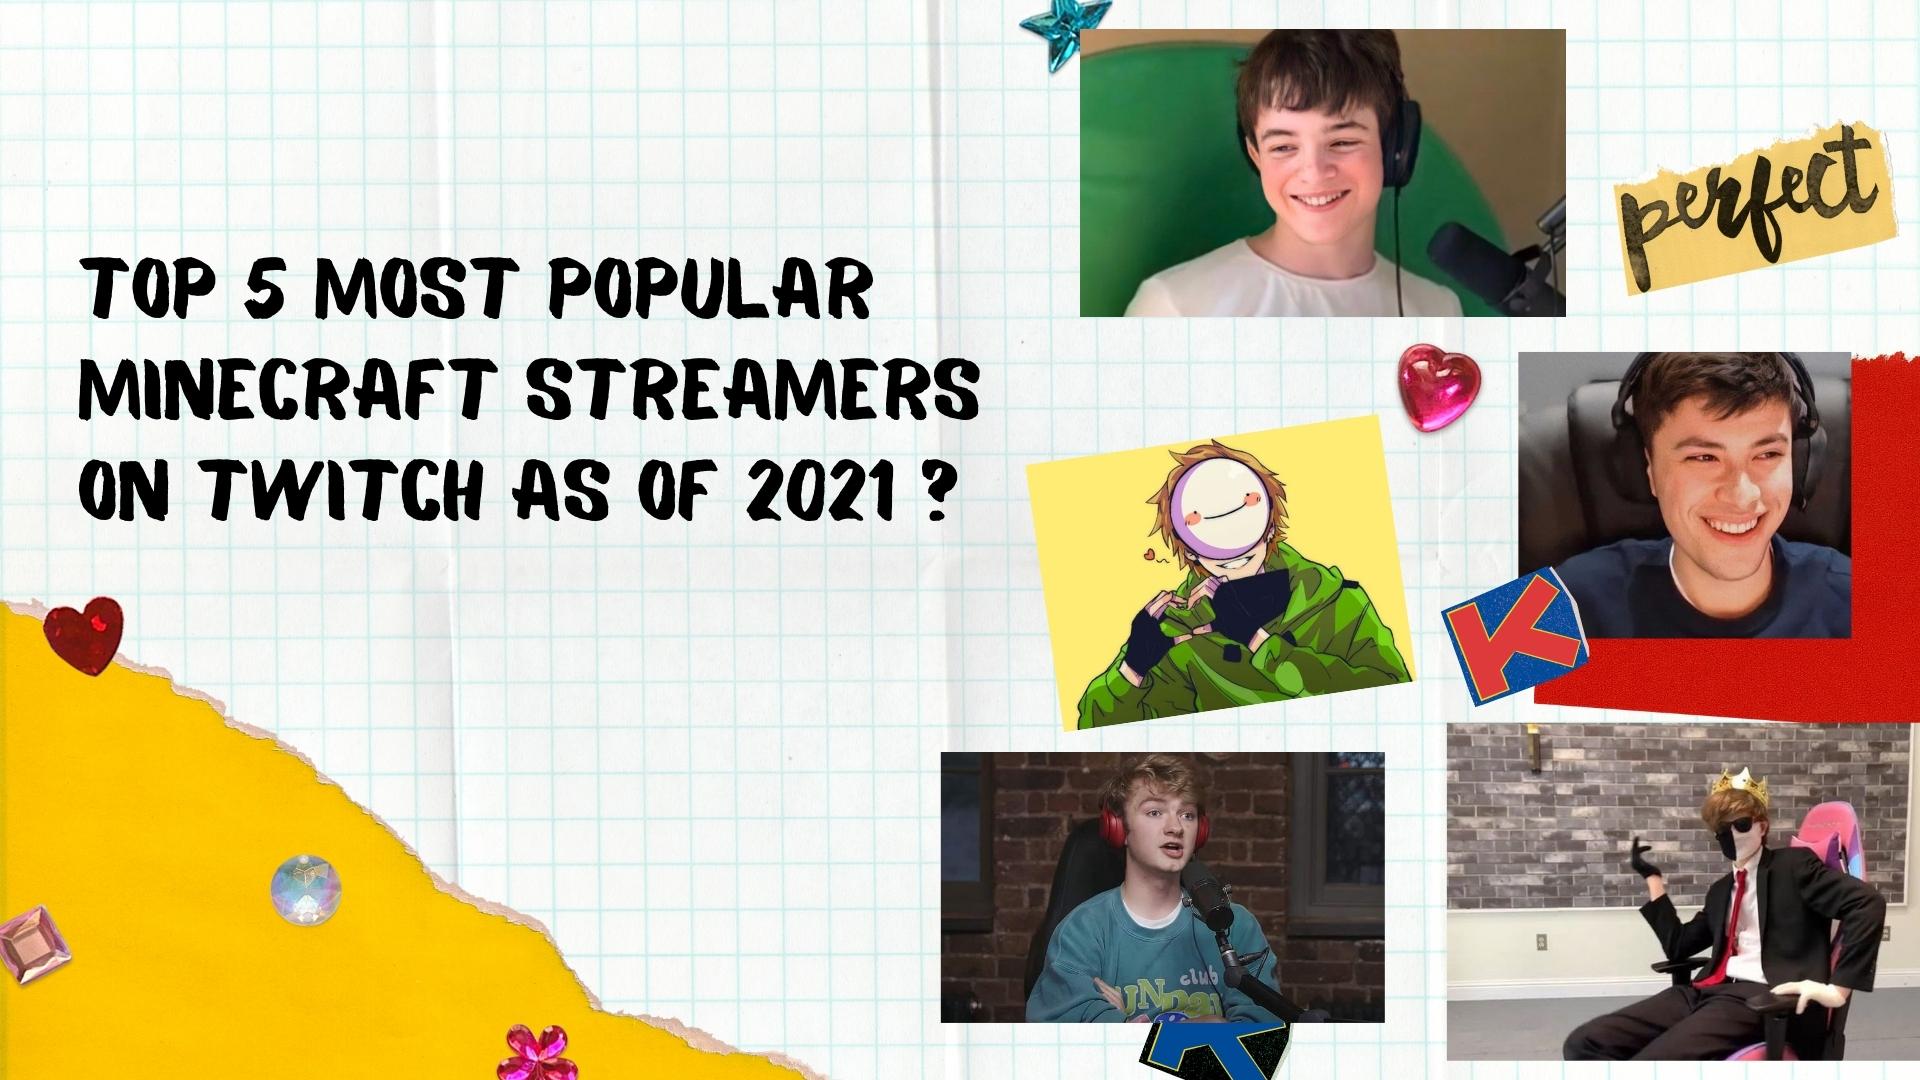 TOP 5 MOST POPULAR MINECRAFT STREAMERS ON TWITCH AS OF 2021 - MCYT Store